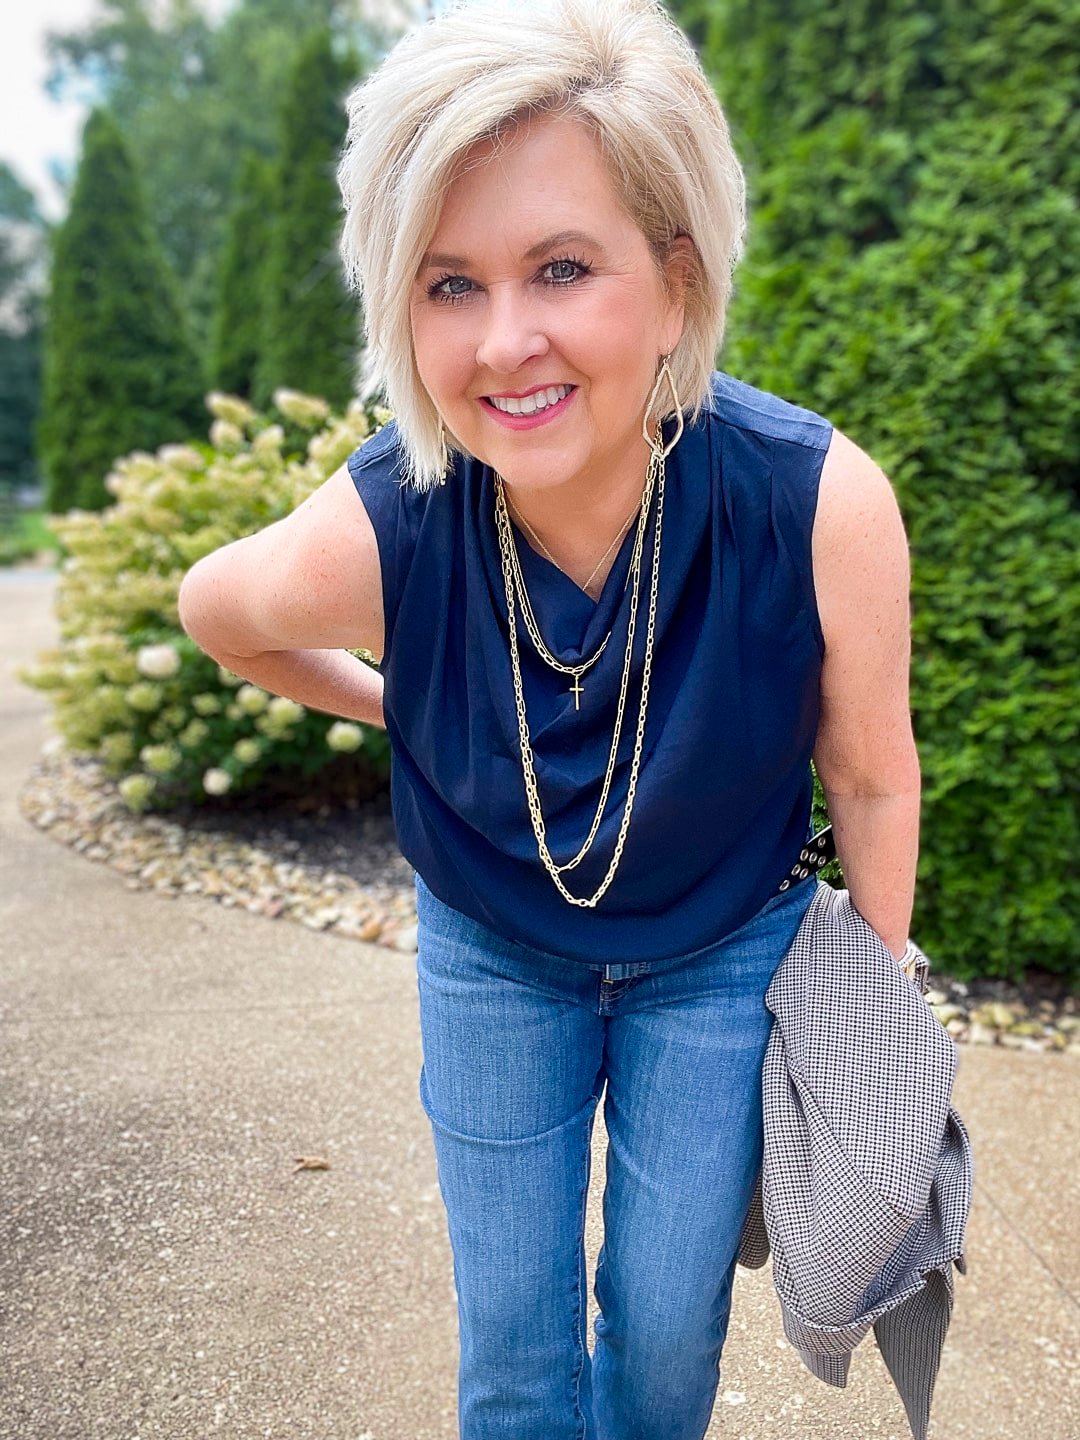 Over 40 Fashion Blogger, Tania Stephens is styling jeans for a western style2